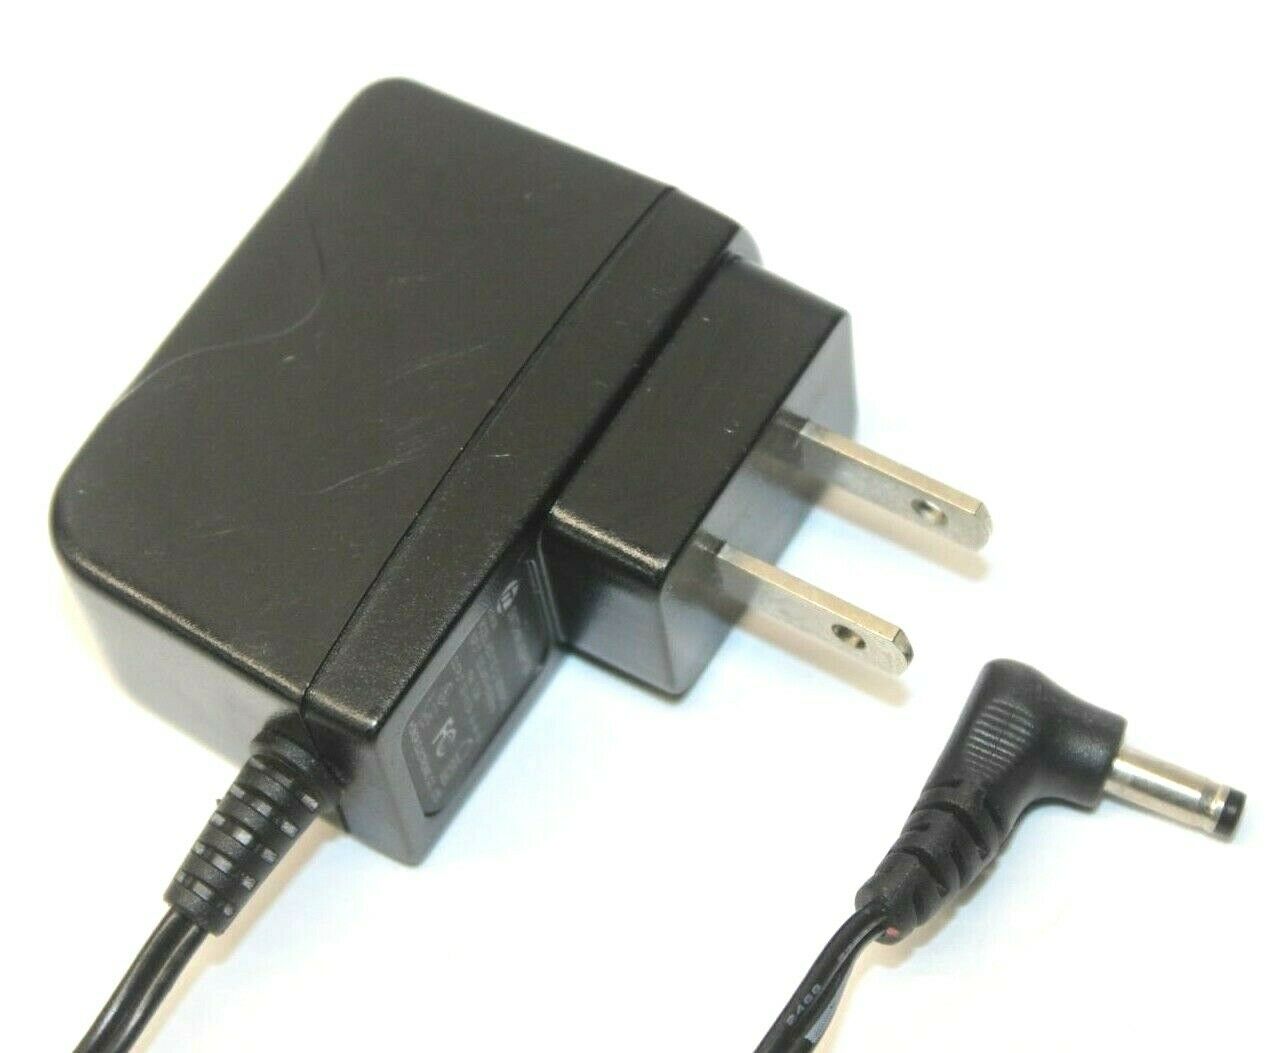 5V AC Adaptor Power Supply for Bush Classic Leather Look DAB Radio WO268 Manufacturer Warranty: 1 y - Click Image to Close